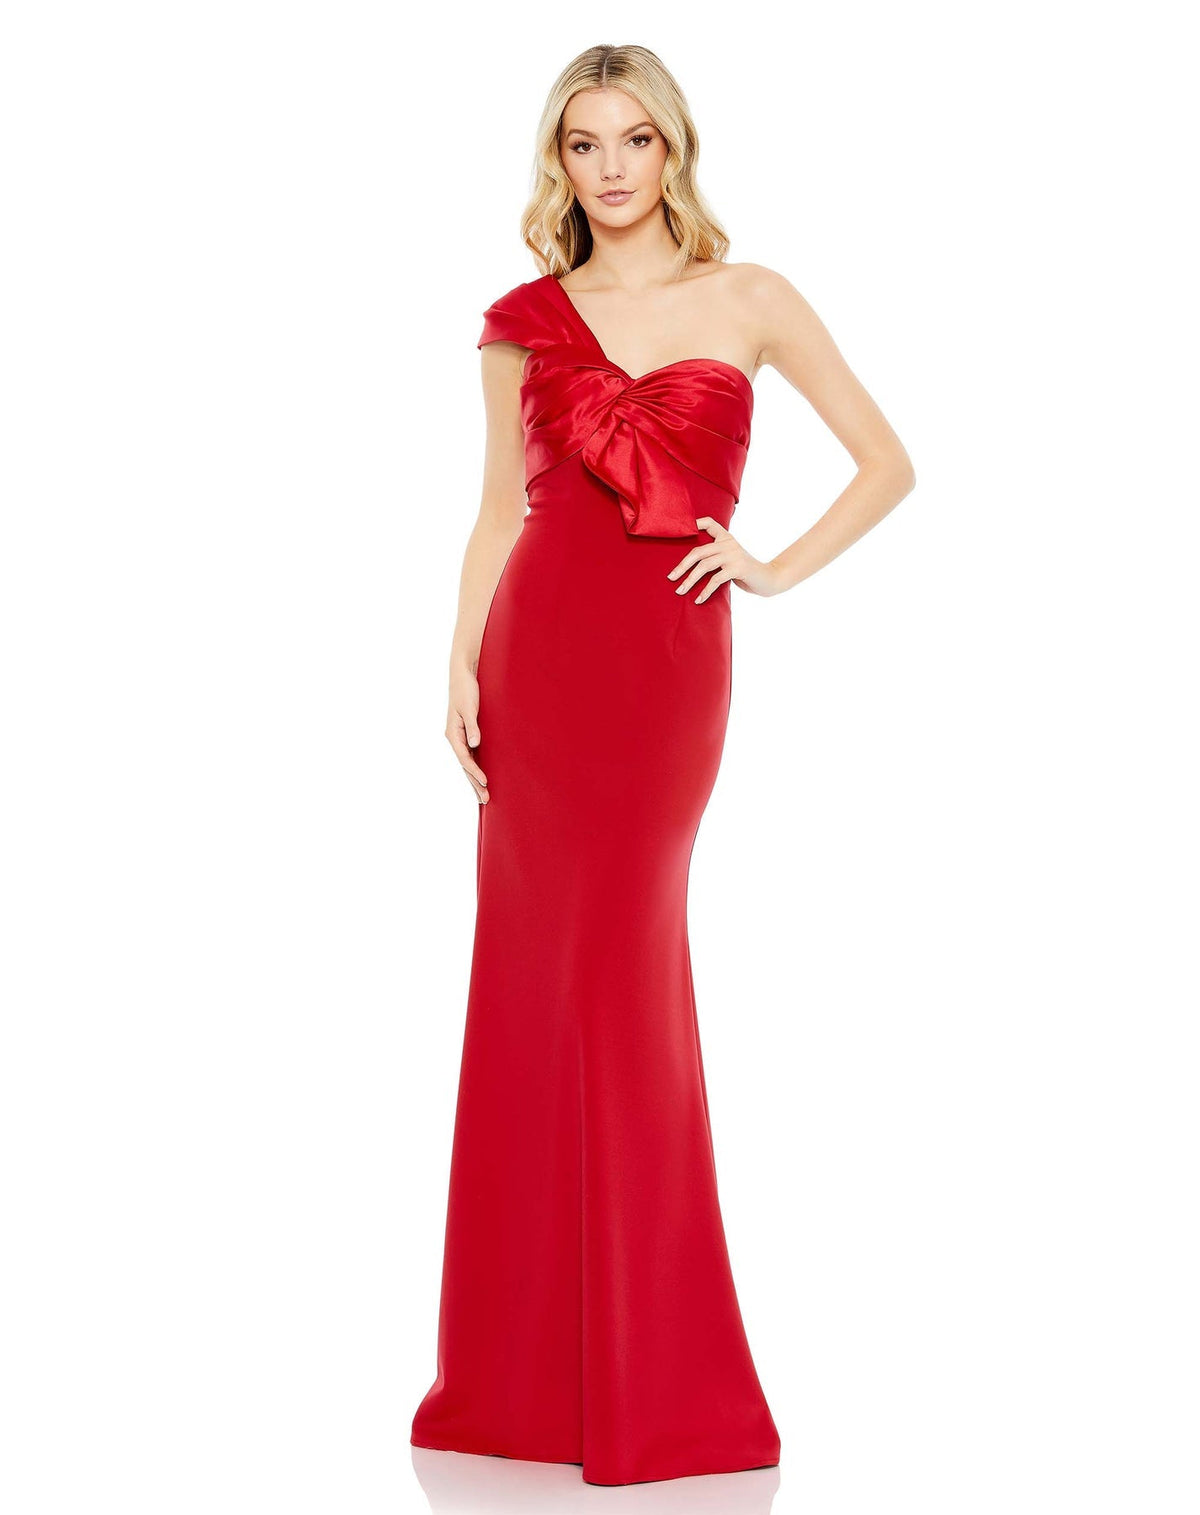 Mac Duggal, ONE SHOULDER DRAPED TRUMPET GOWN, Style #49547, red